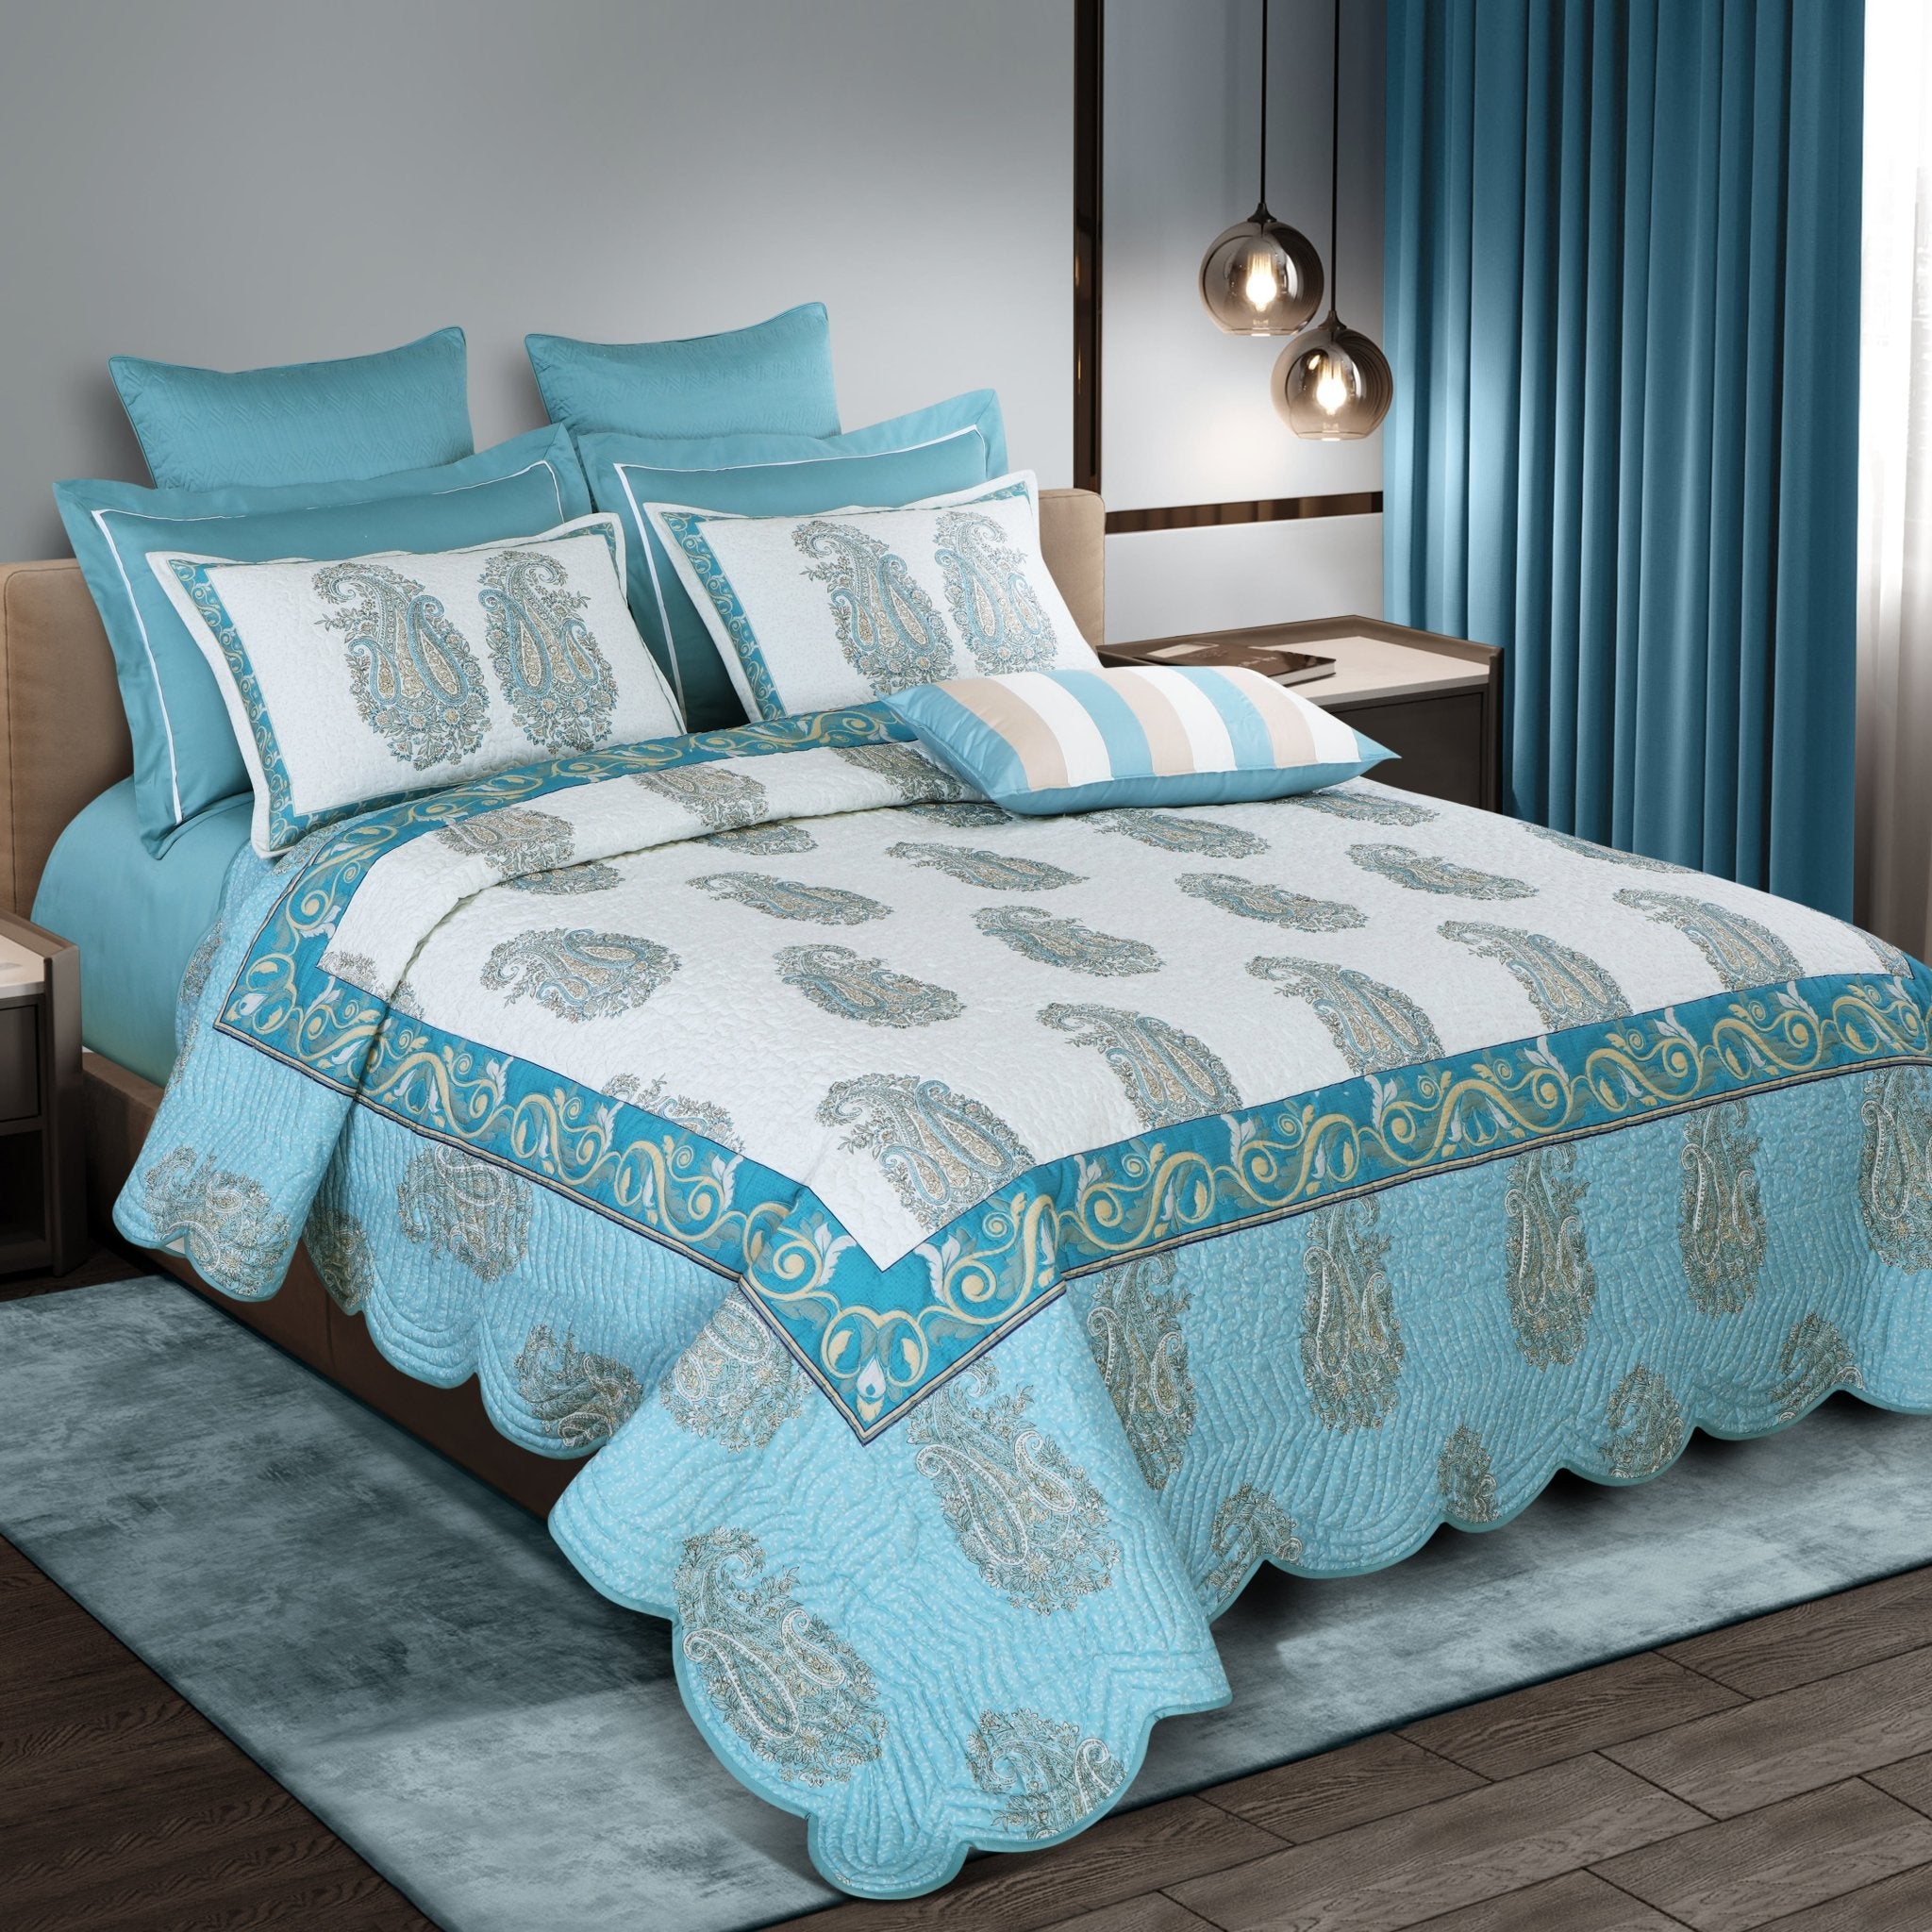 Malako Fleur Botanique White & Blue King Size 100% Cotton Quilted Bed Cover Set - MALAKO